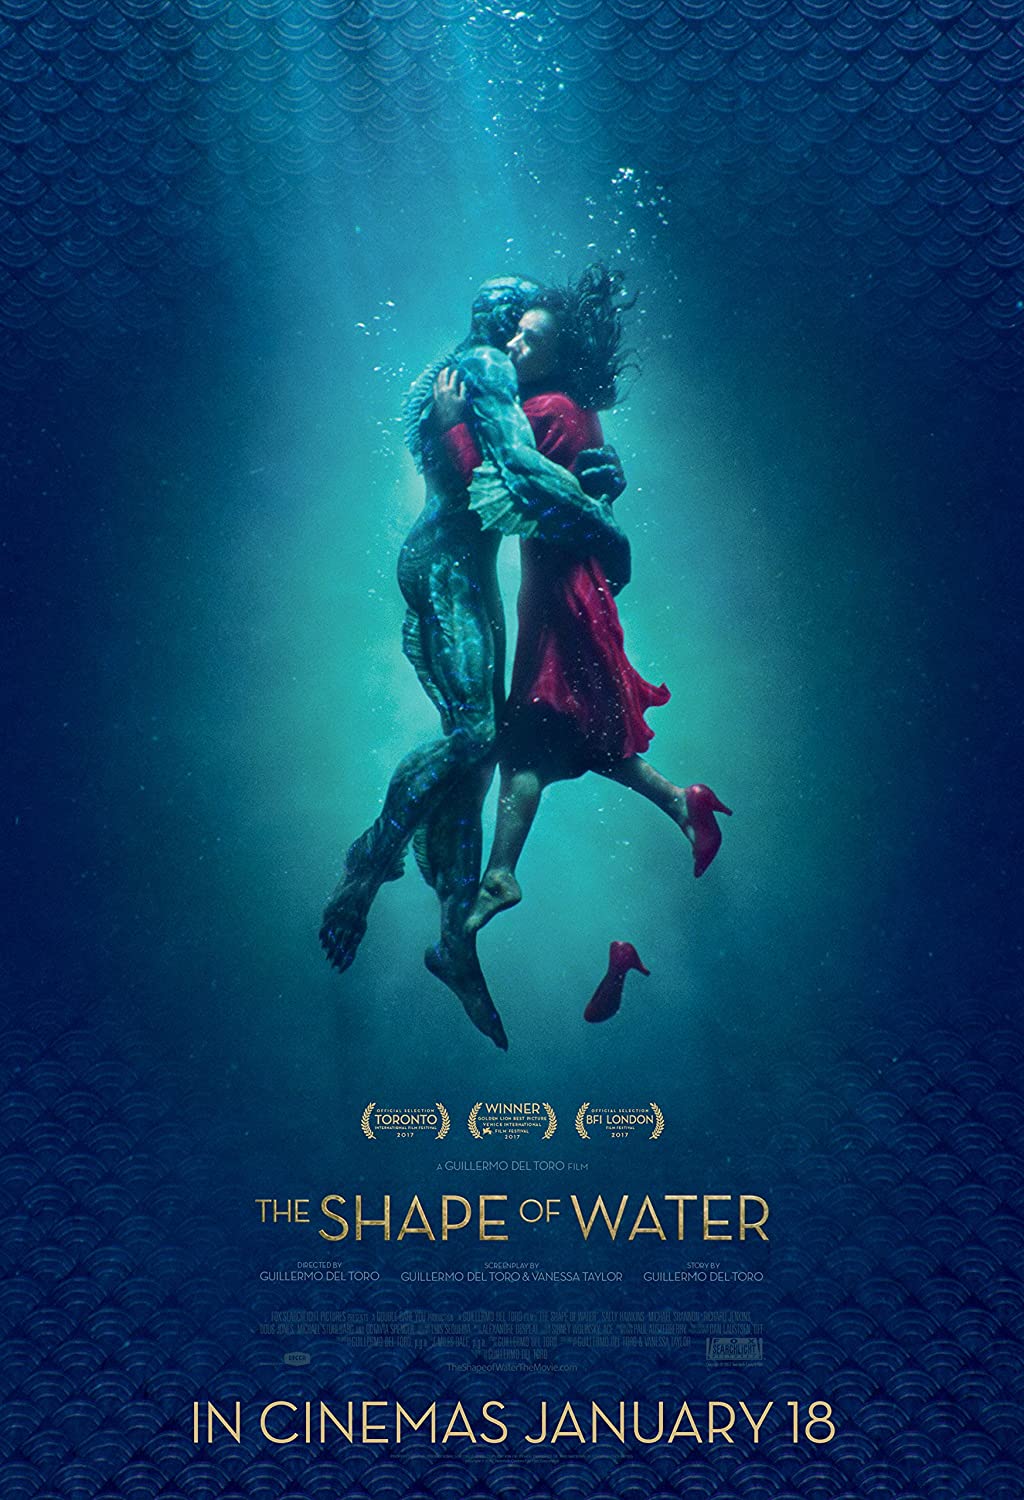 Shape of Water poster from successful Lost Boys School of VFX alumni film credits for Visual Effects.